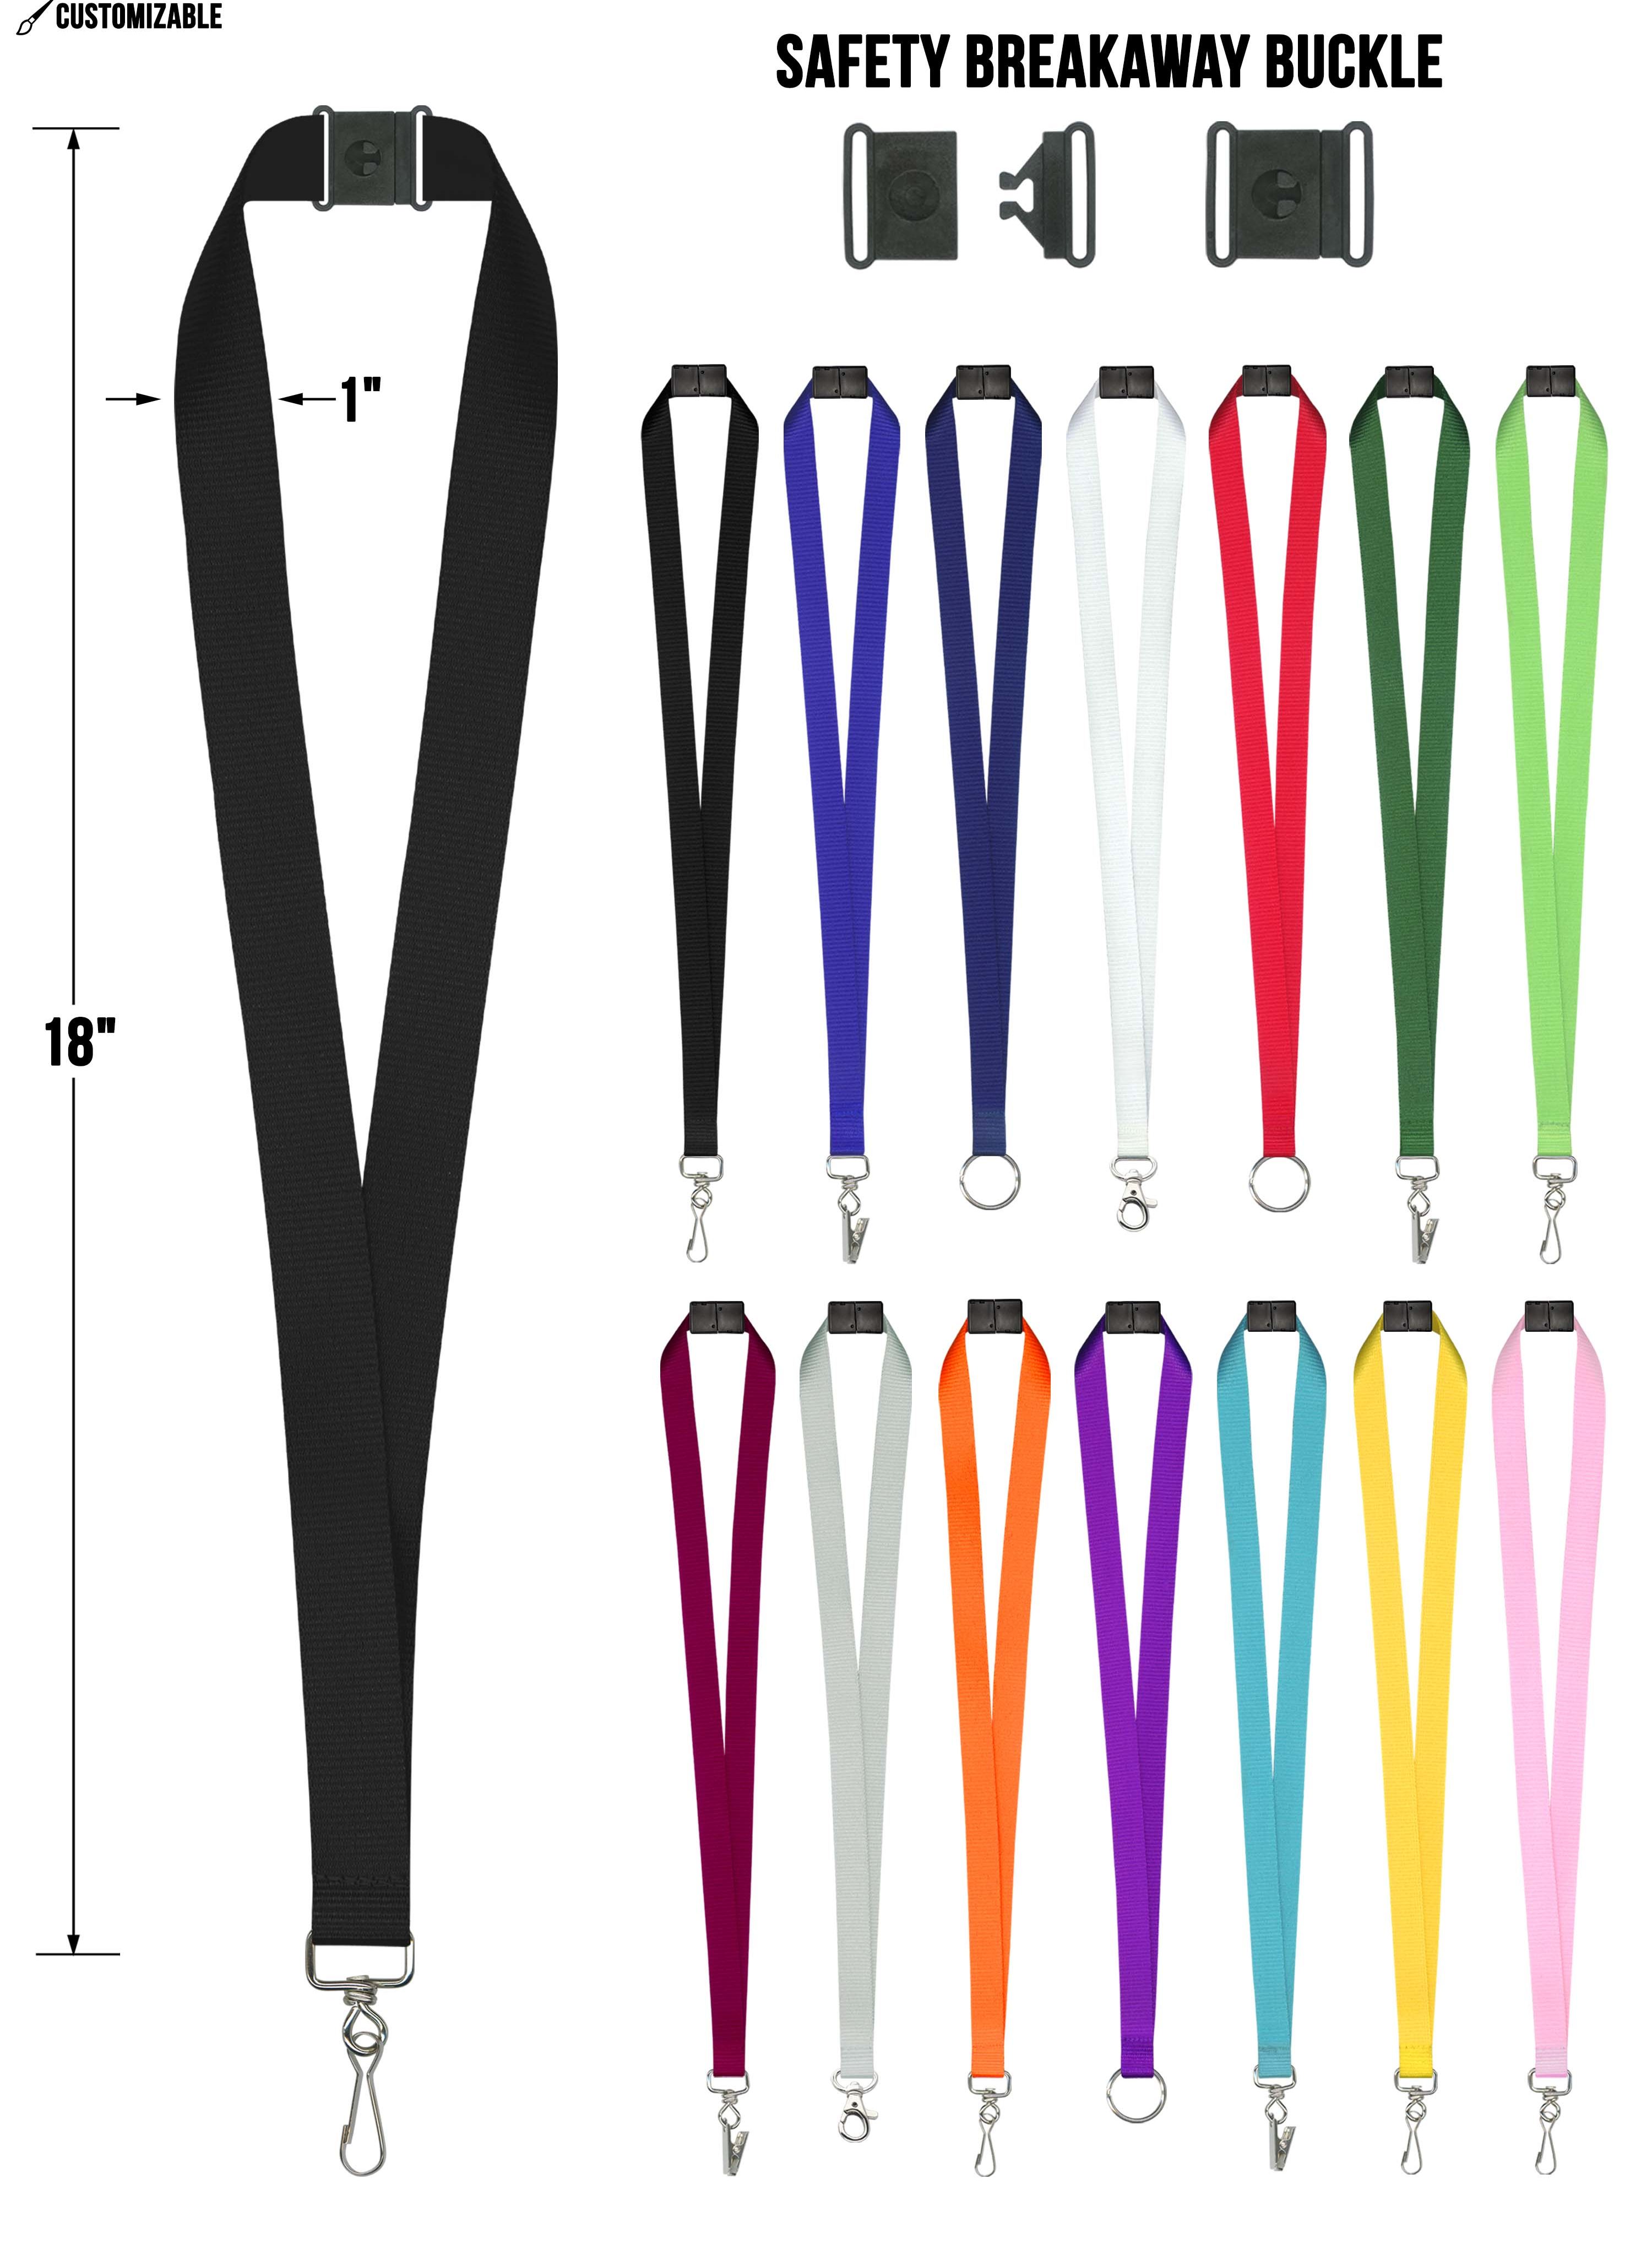 Customizable 1" Safety Breakaway Lanyards: Perfect for Events, Trade Shows, & Everyday Use